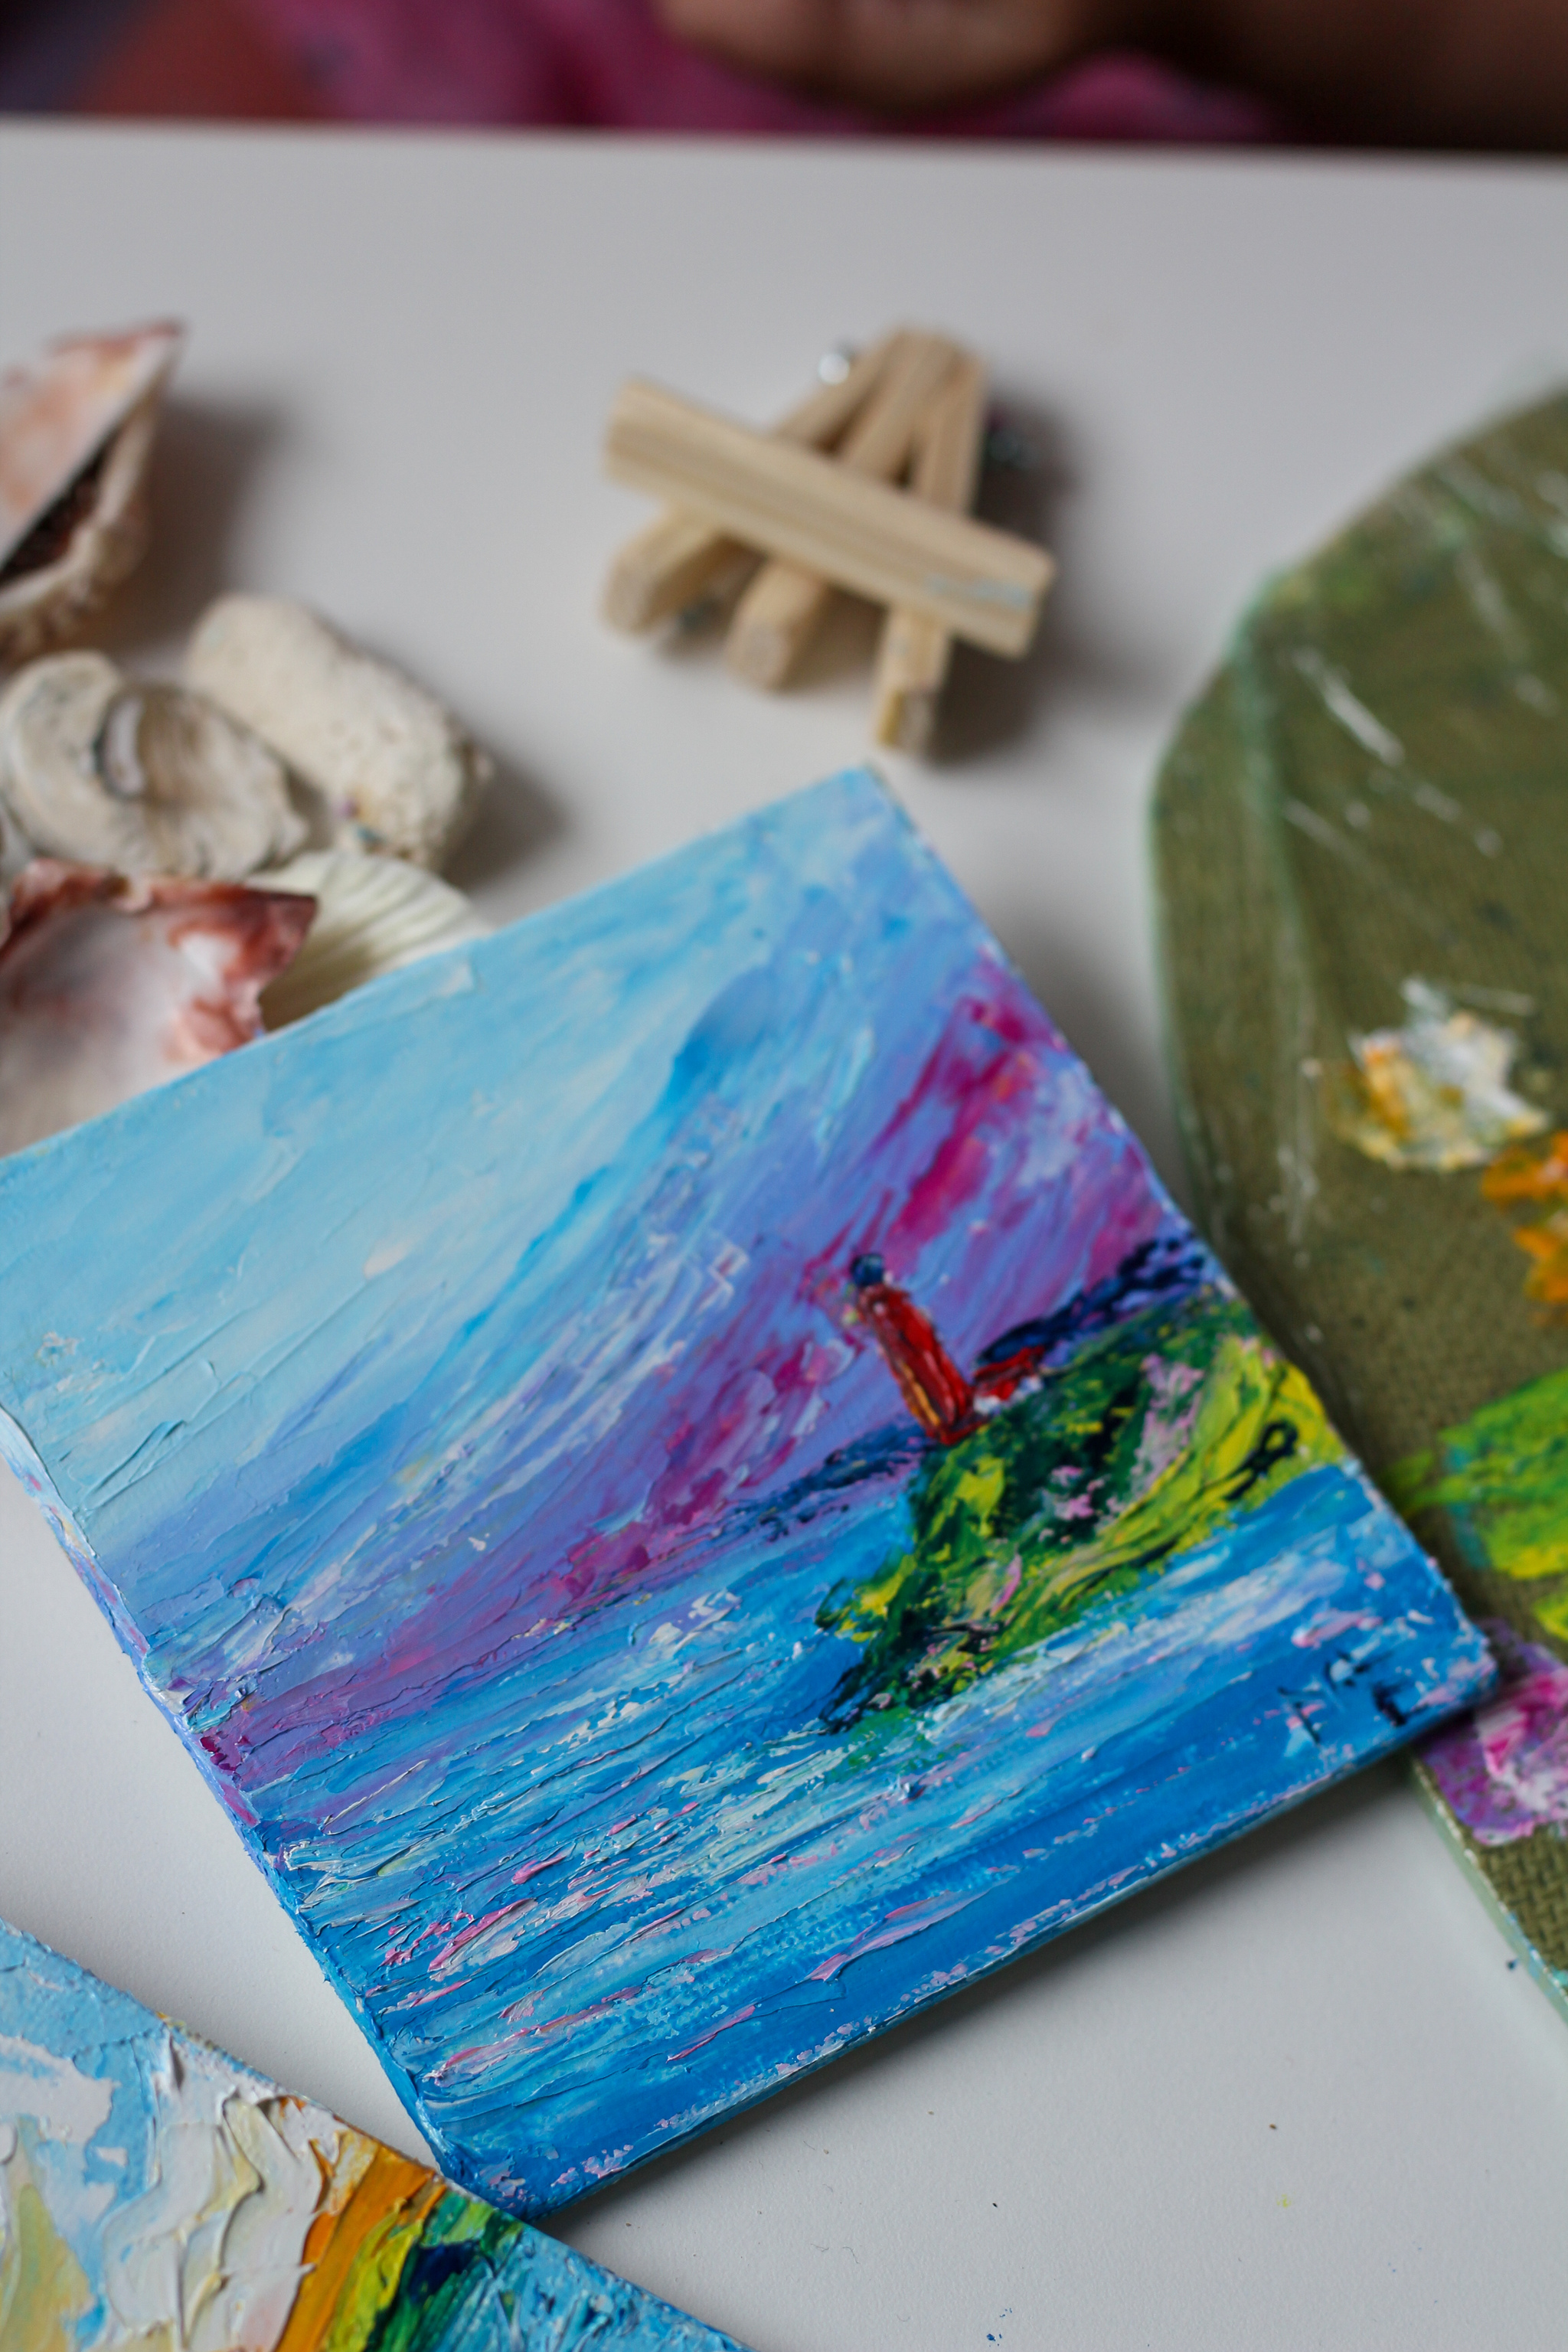 Miniature paintings 2 - My, Lighthouse, Oil painting, Painting, Impressionism, Sea, Oil paints, Artist, I'm an artist - that's how I see it, Painting, Butter, Landscape, Longpost